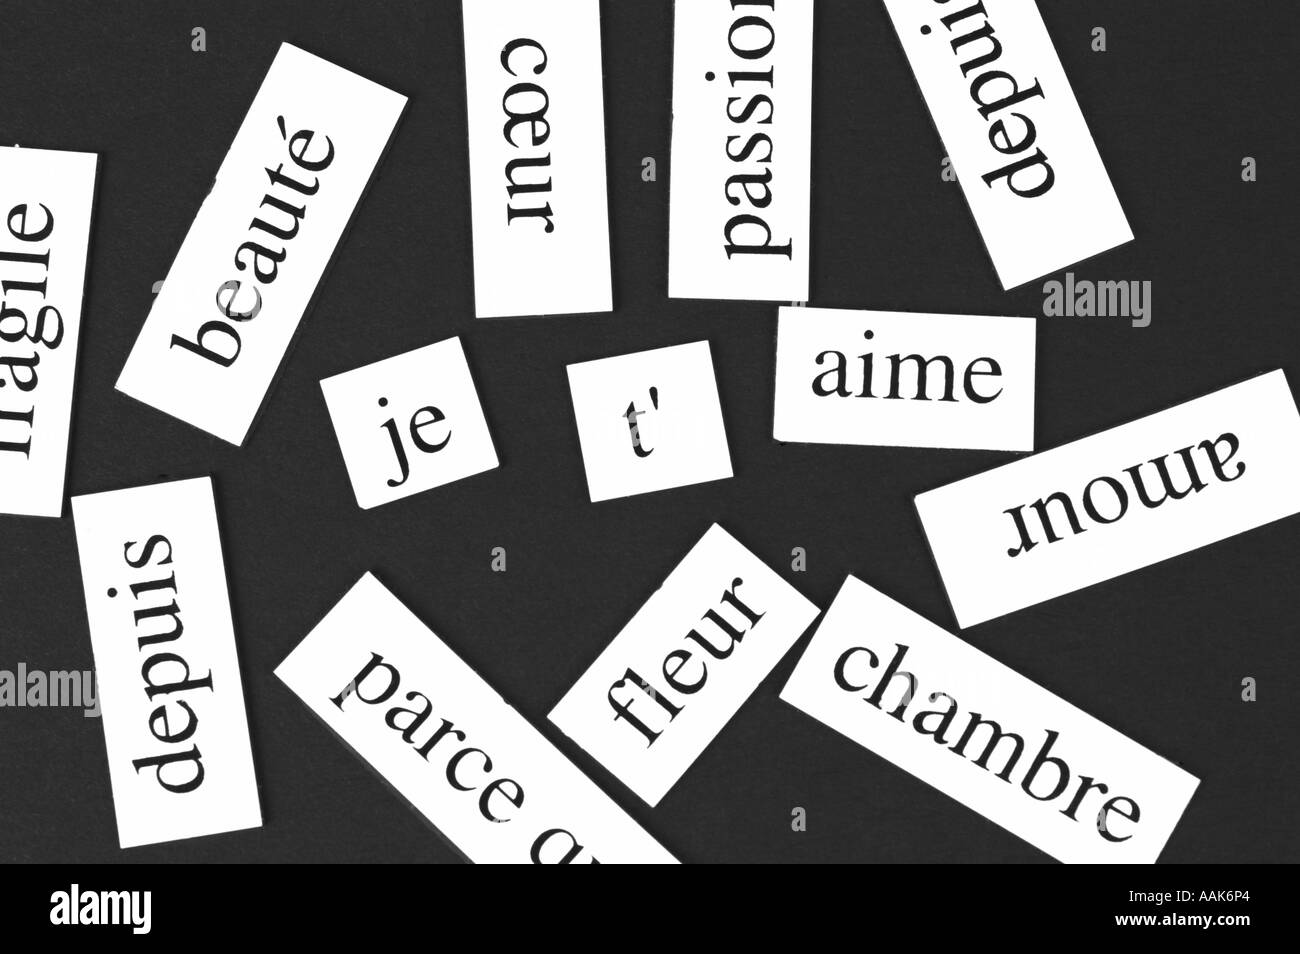 Magnetic fridge words jumbled up but with the words Je t aime in the middle Stock Photo